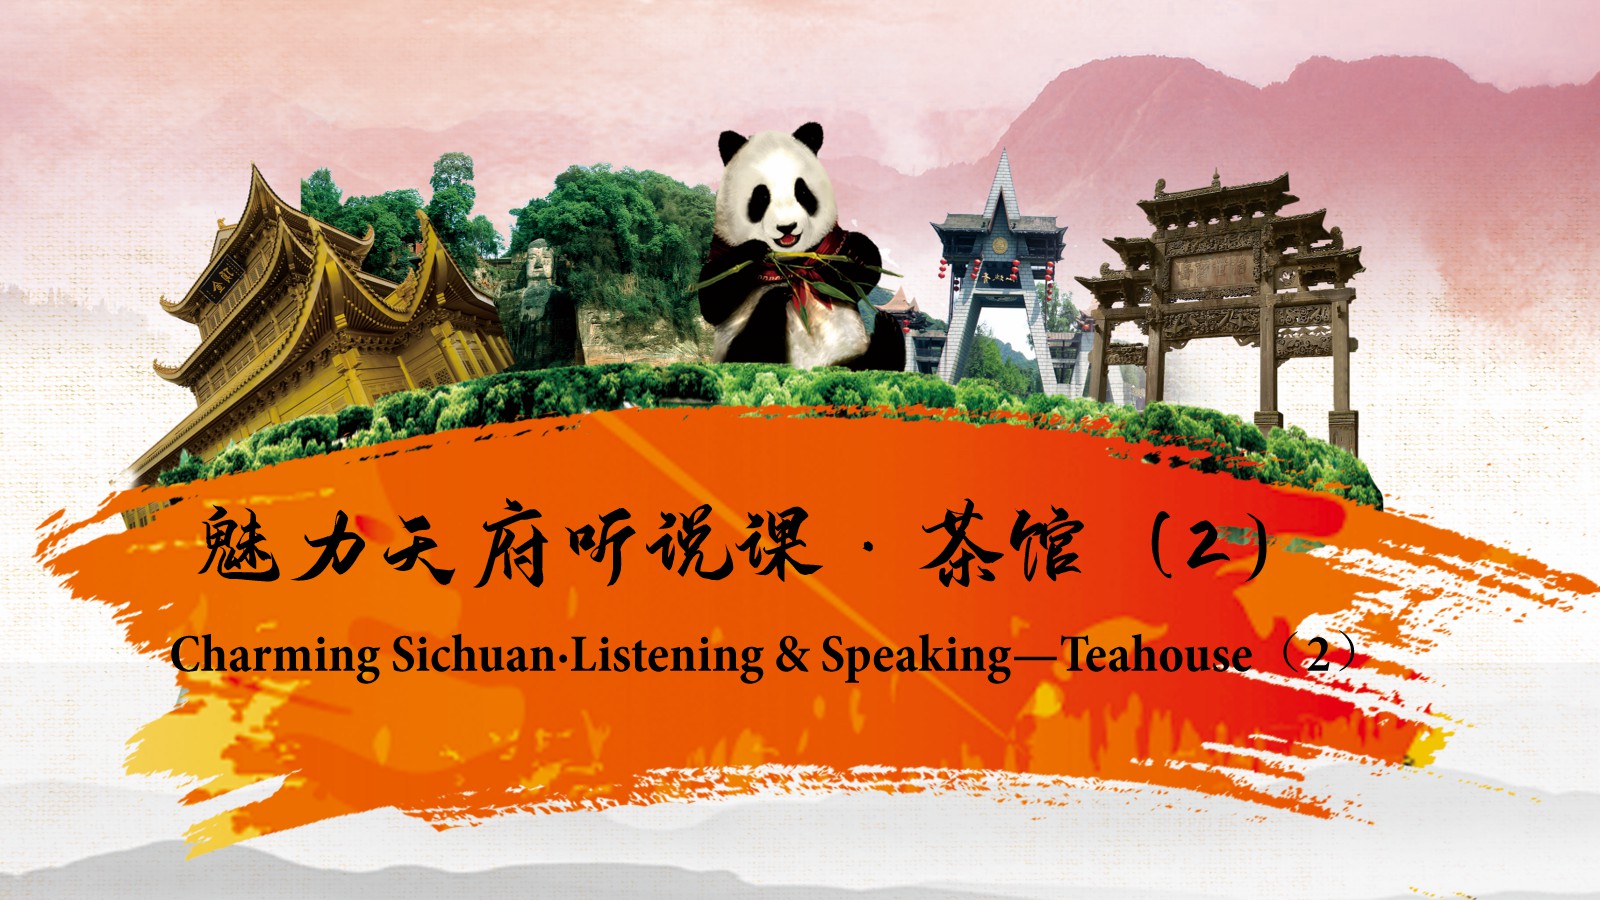 Charming Sichuan·Listening & Speaking——Teahouse（2）